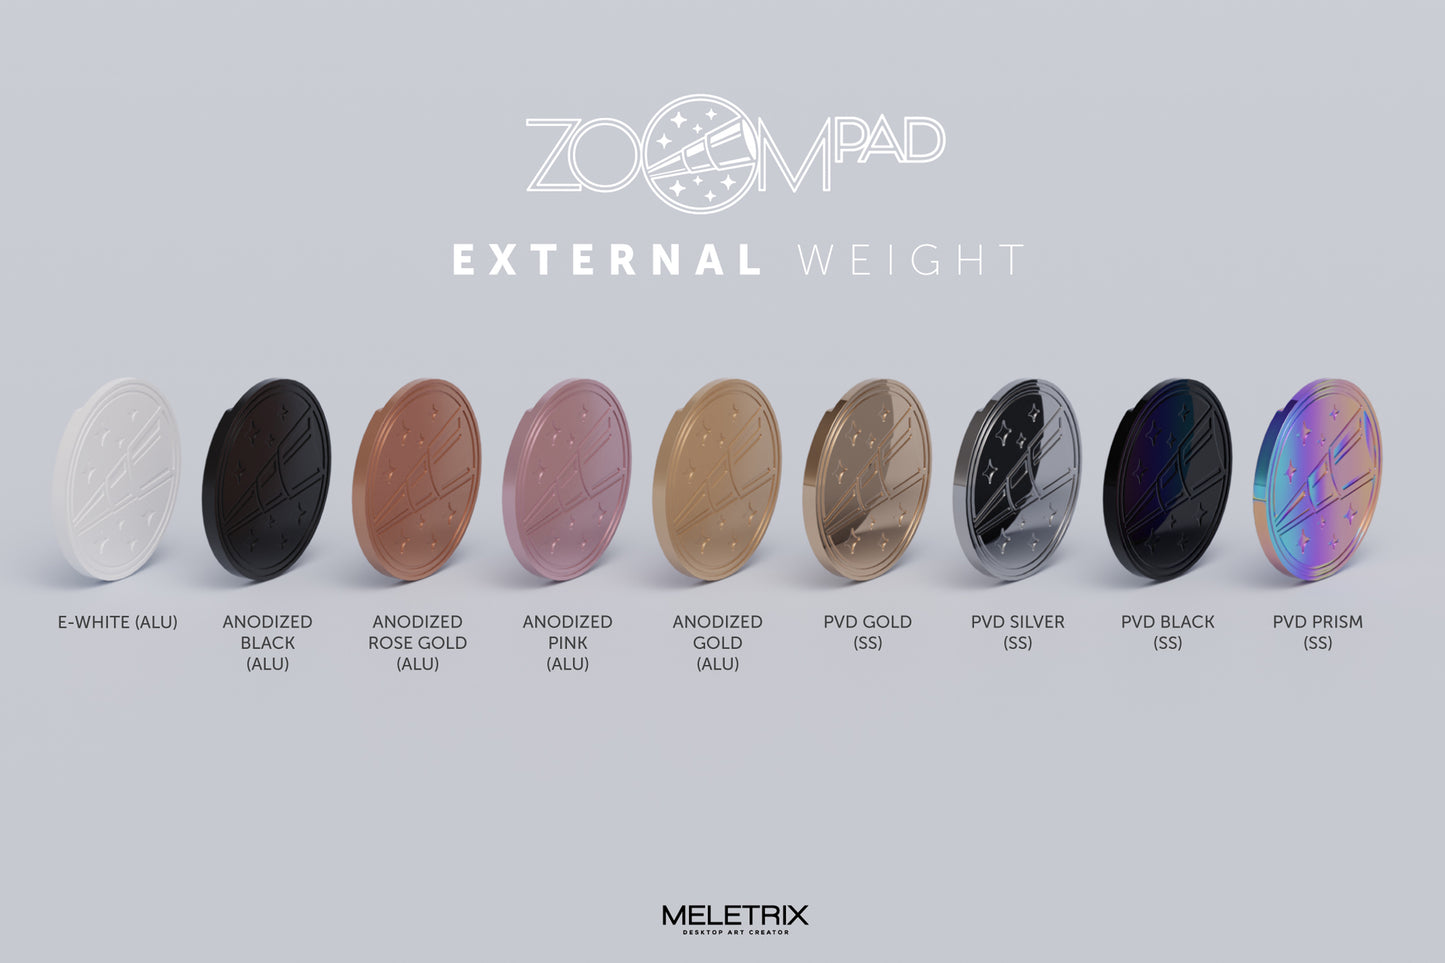 [Group-Buy] Meletrix ZoomPad  - Extra Weights [Air Shipping]